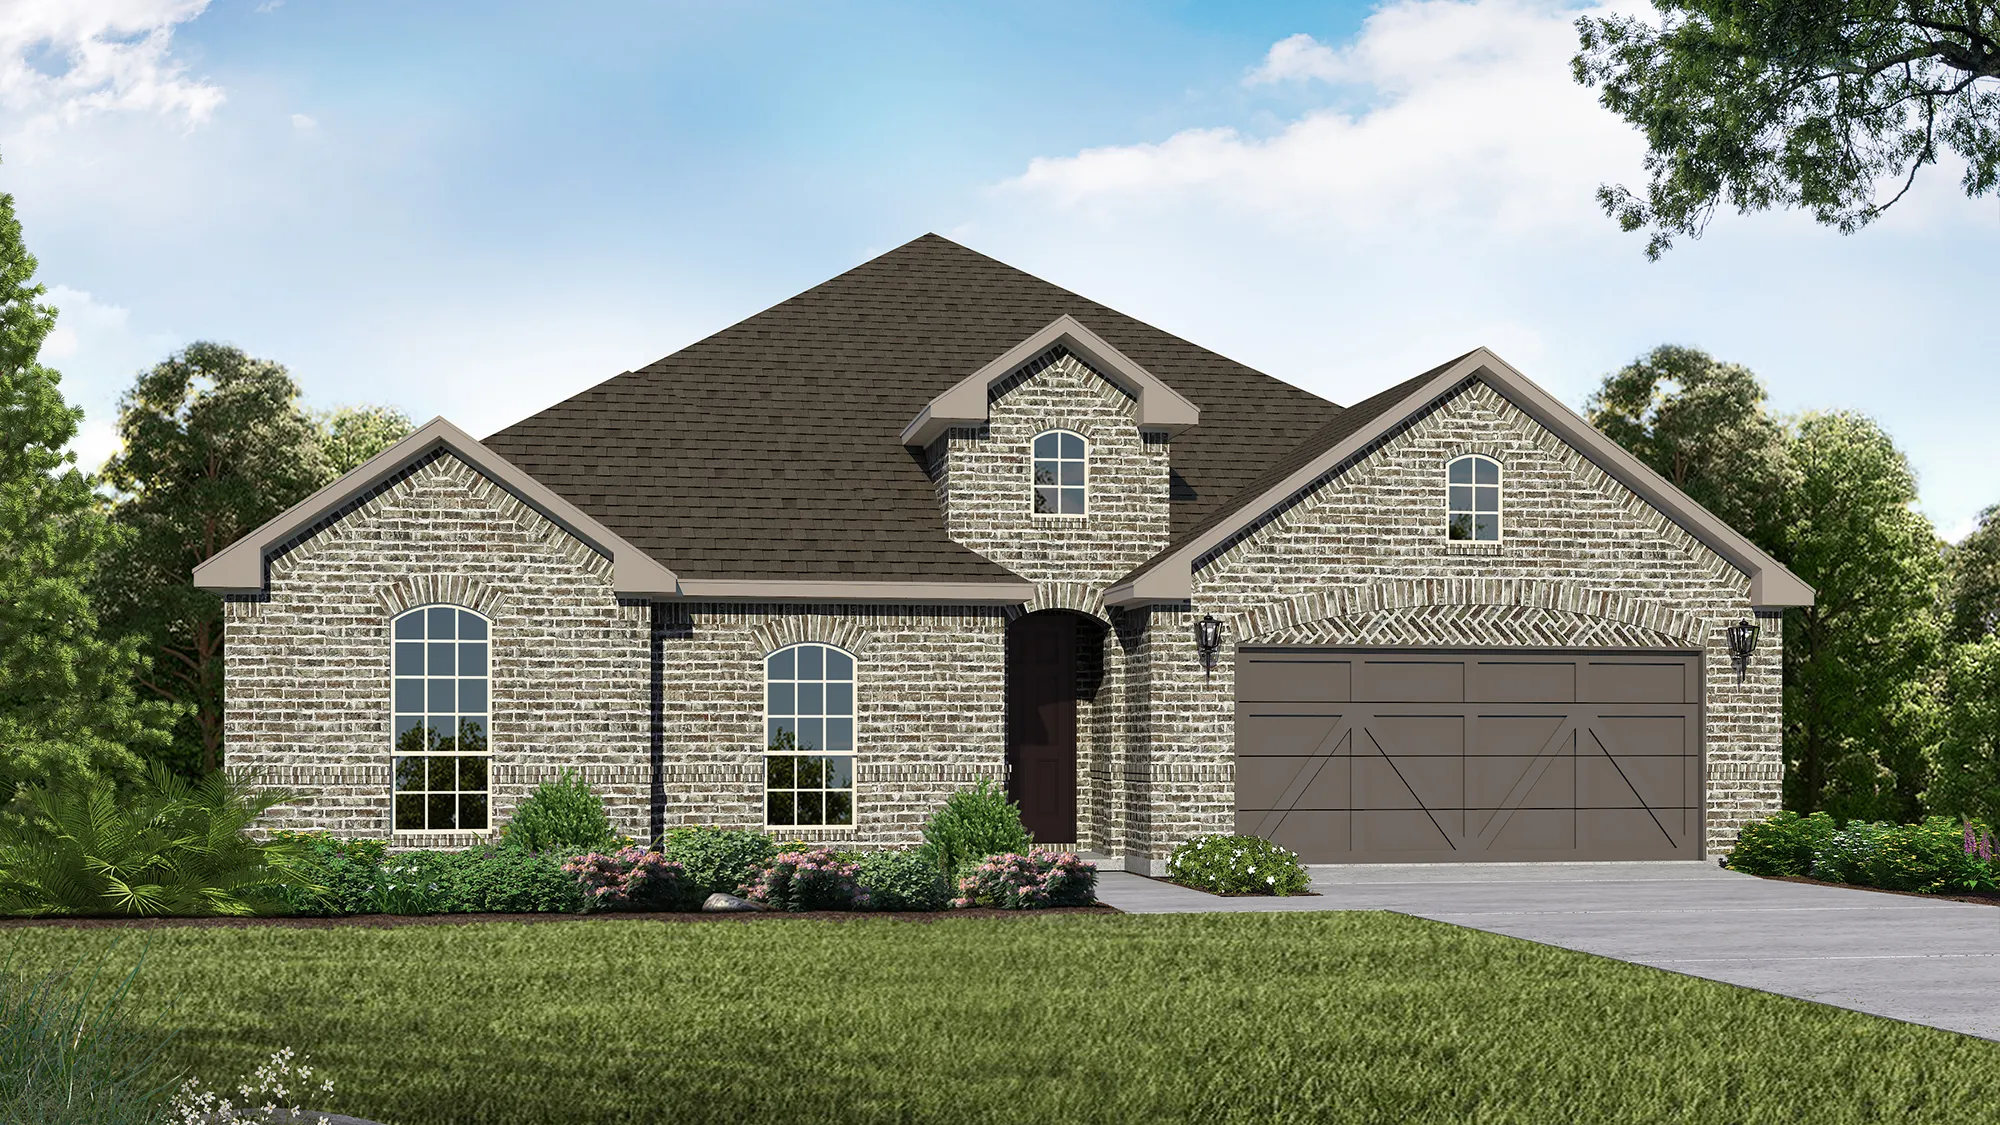 Plan 1683 Elevation A by American Legend Homes